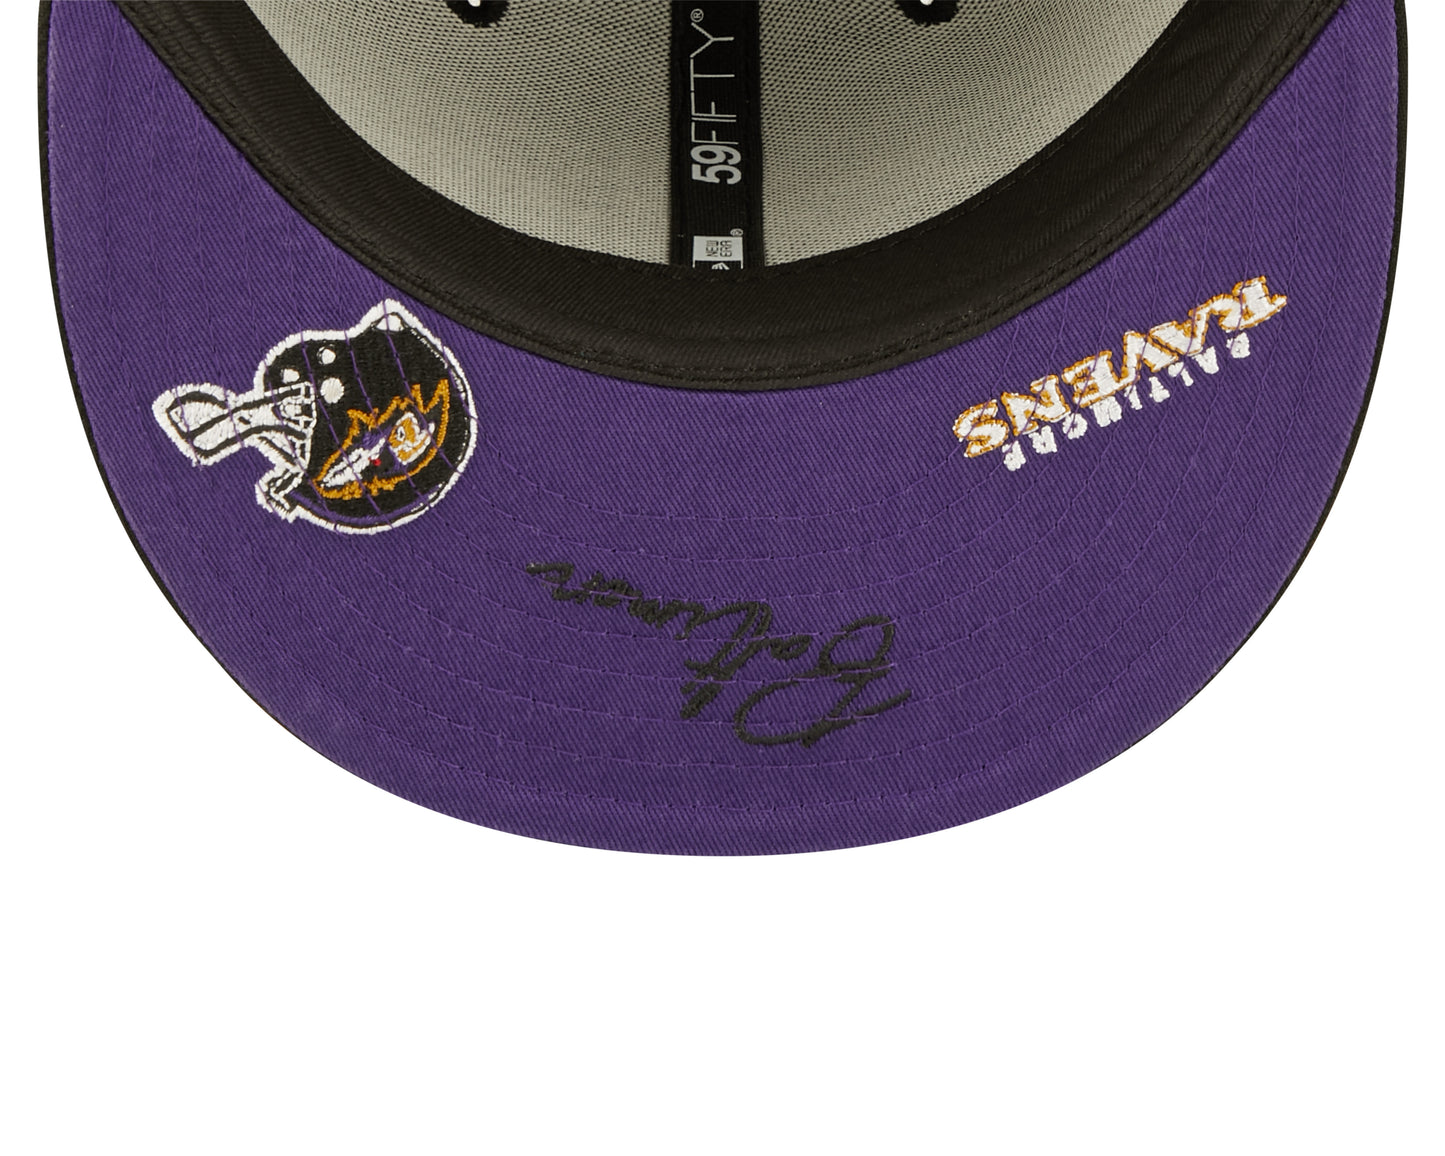 Baltimore Ravens New Era Identity 59FIFTY Fitted Hat - Black